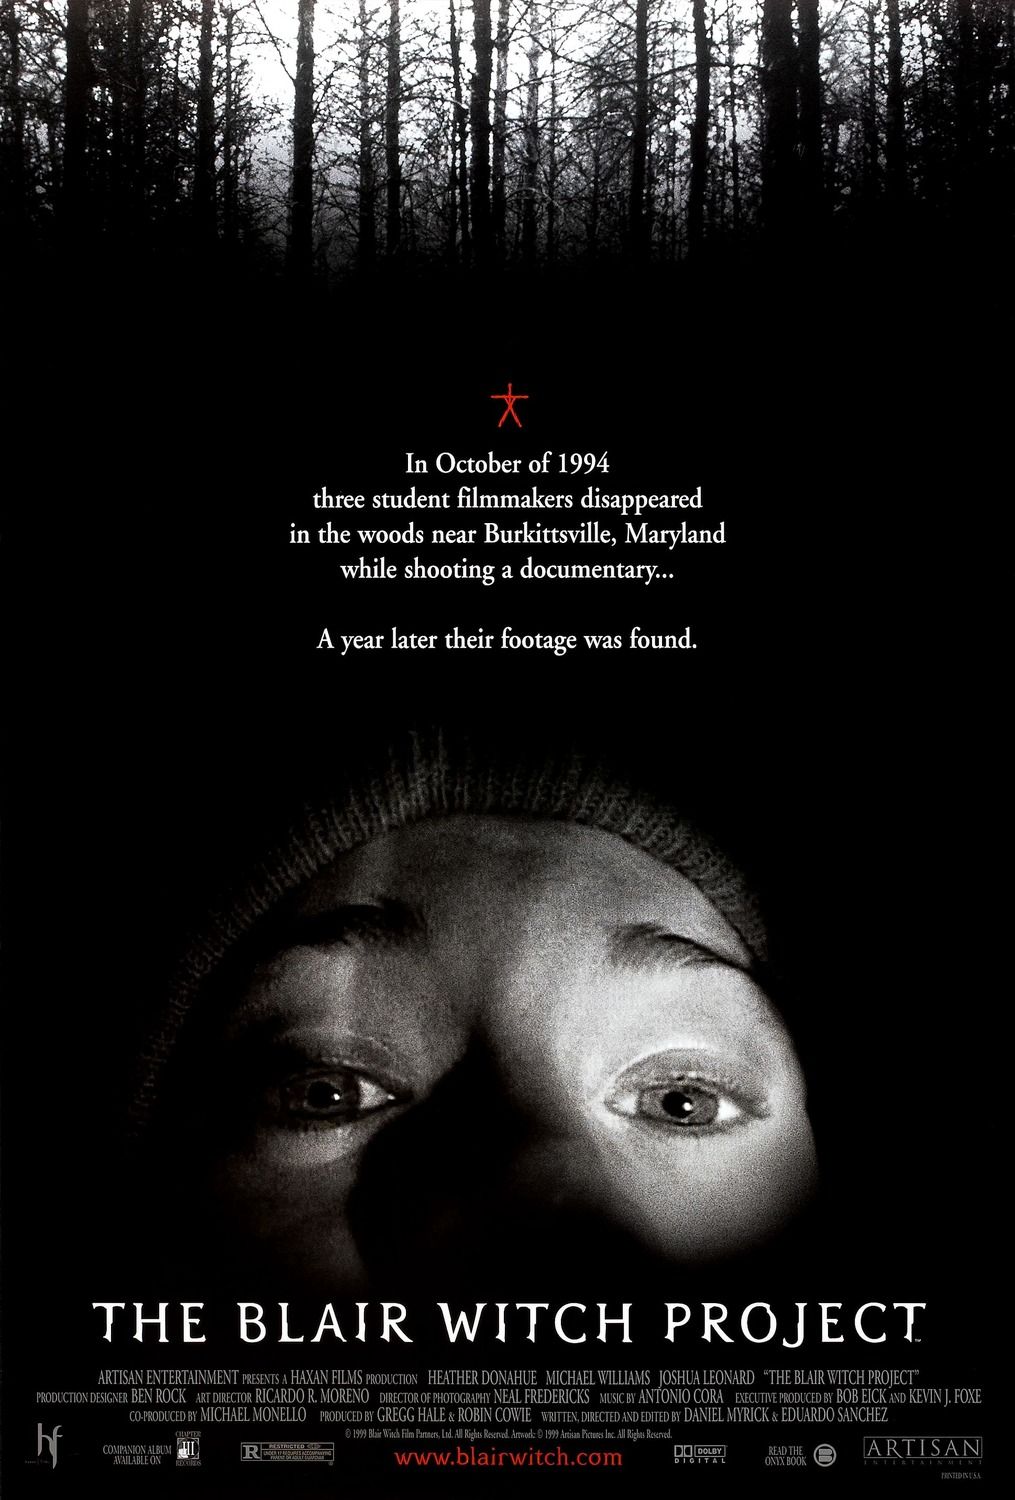 Blair Witch Crew Member Wants Blumhouse To Contact Original Creative Team For New Movie